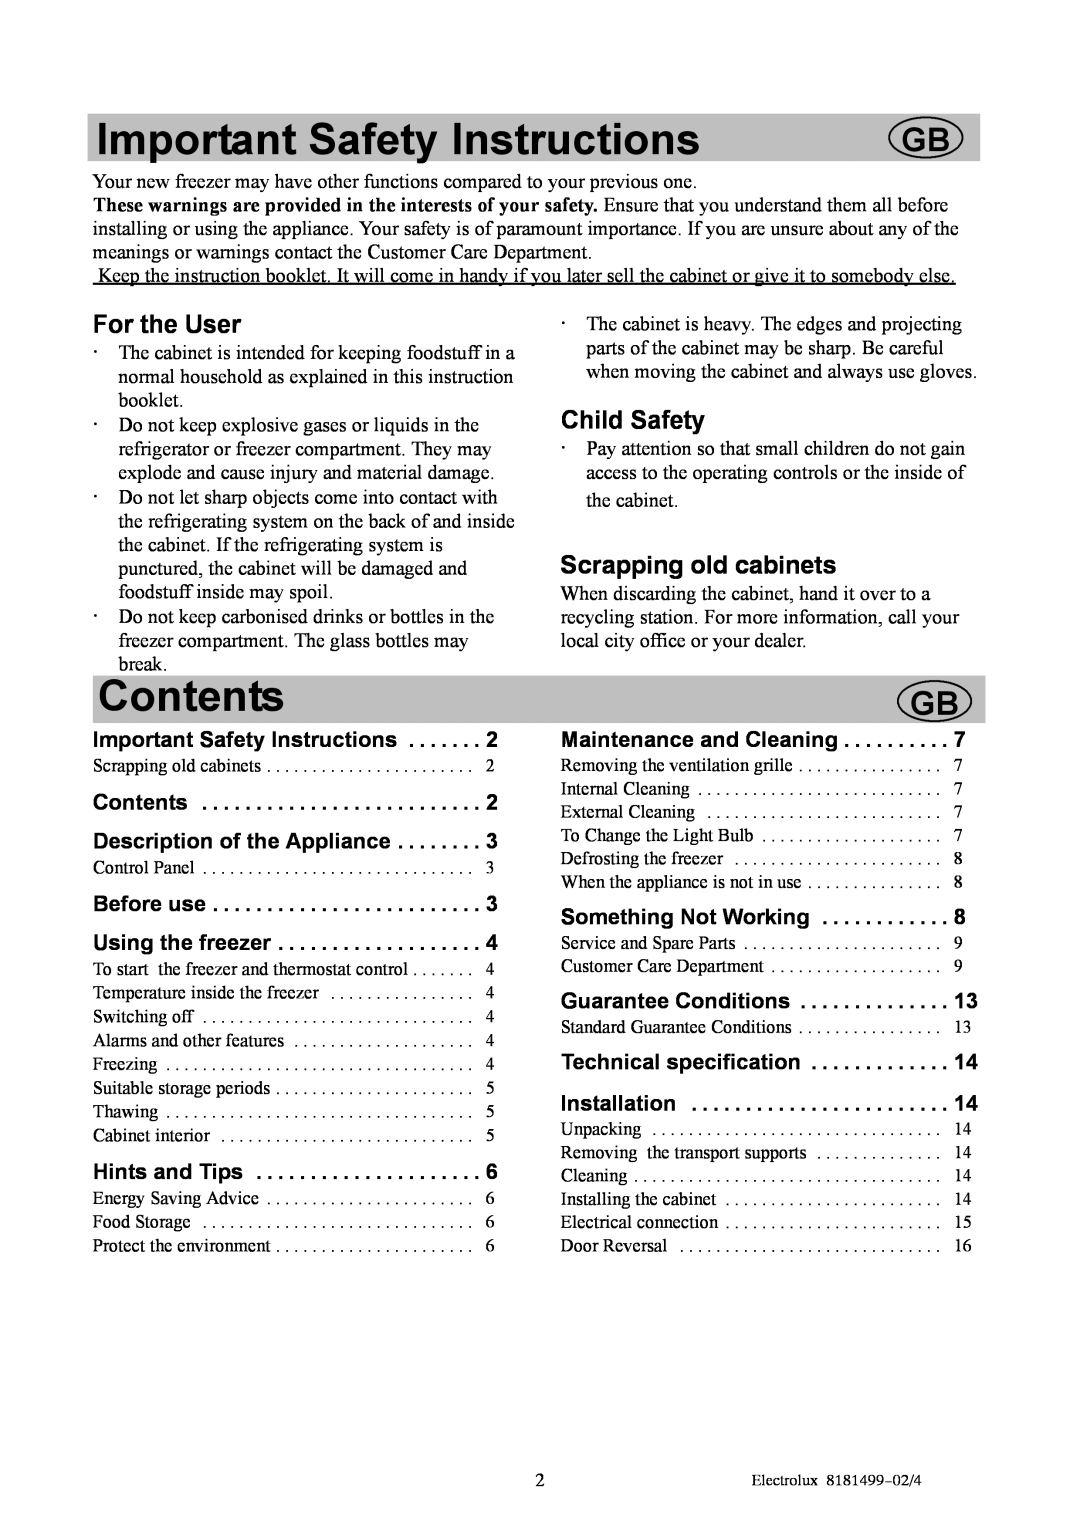 Electrolux EU8216C manual Important Safety Instructions, Contents, For the User, Child Safety, Scrapping old cabinets 